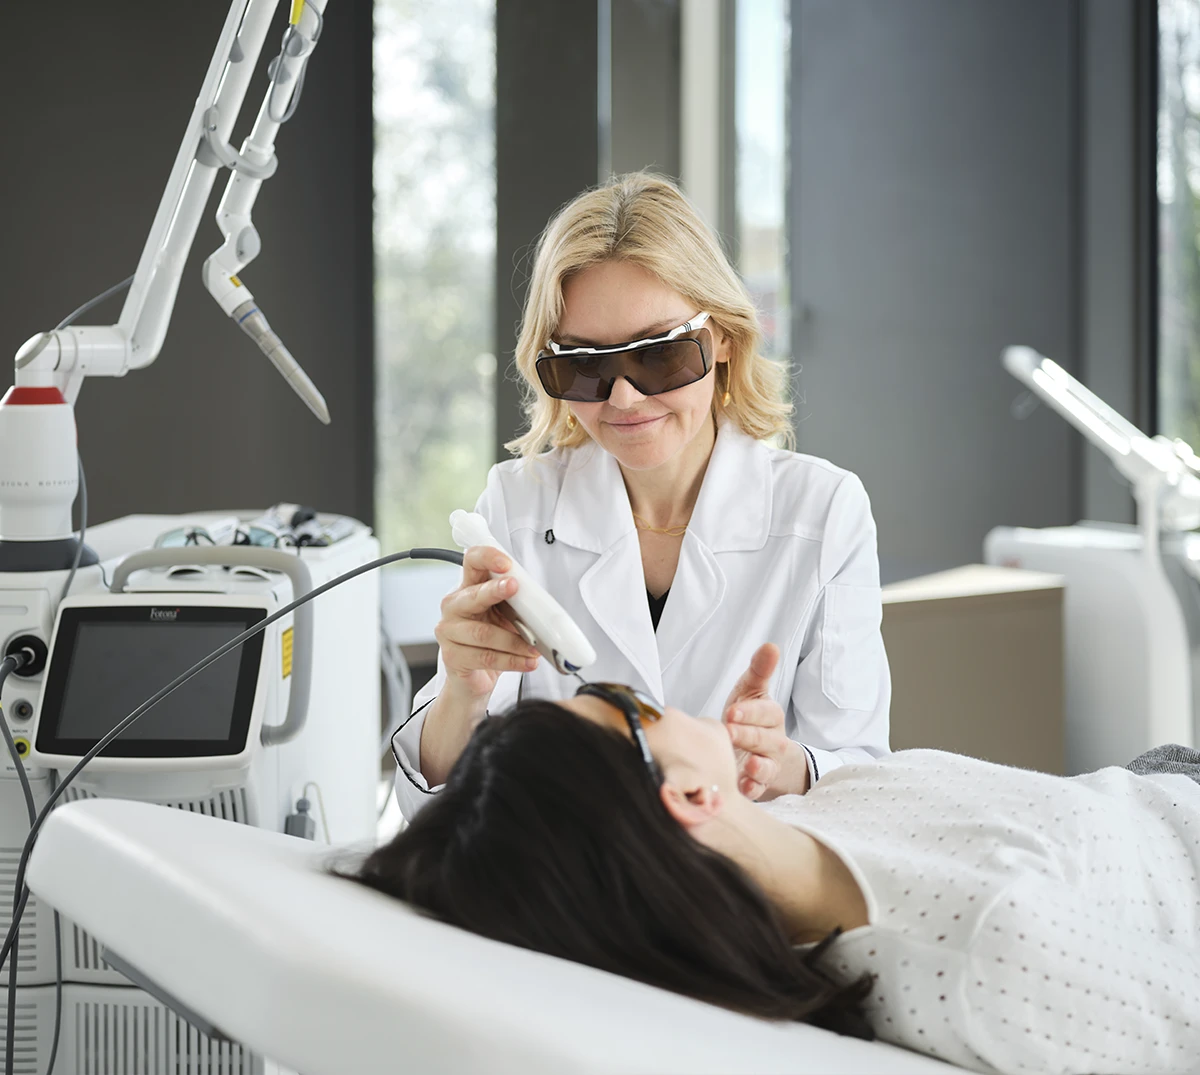 doctor wearing safety glasses is working with laser on patient's face